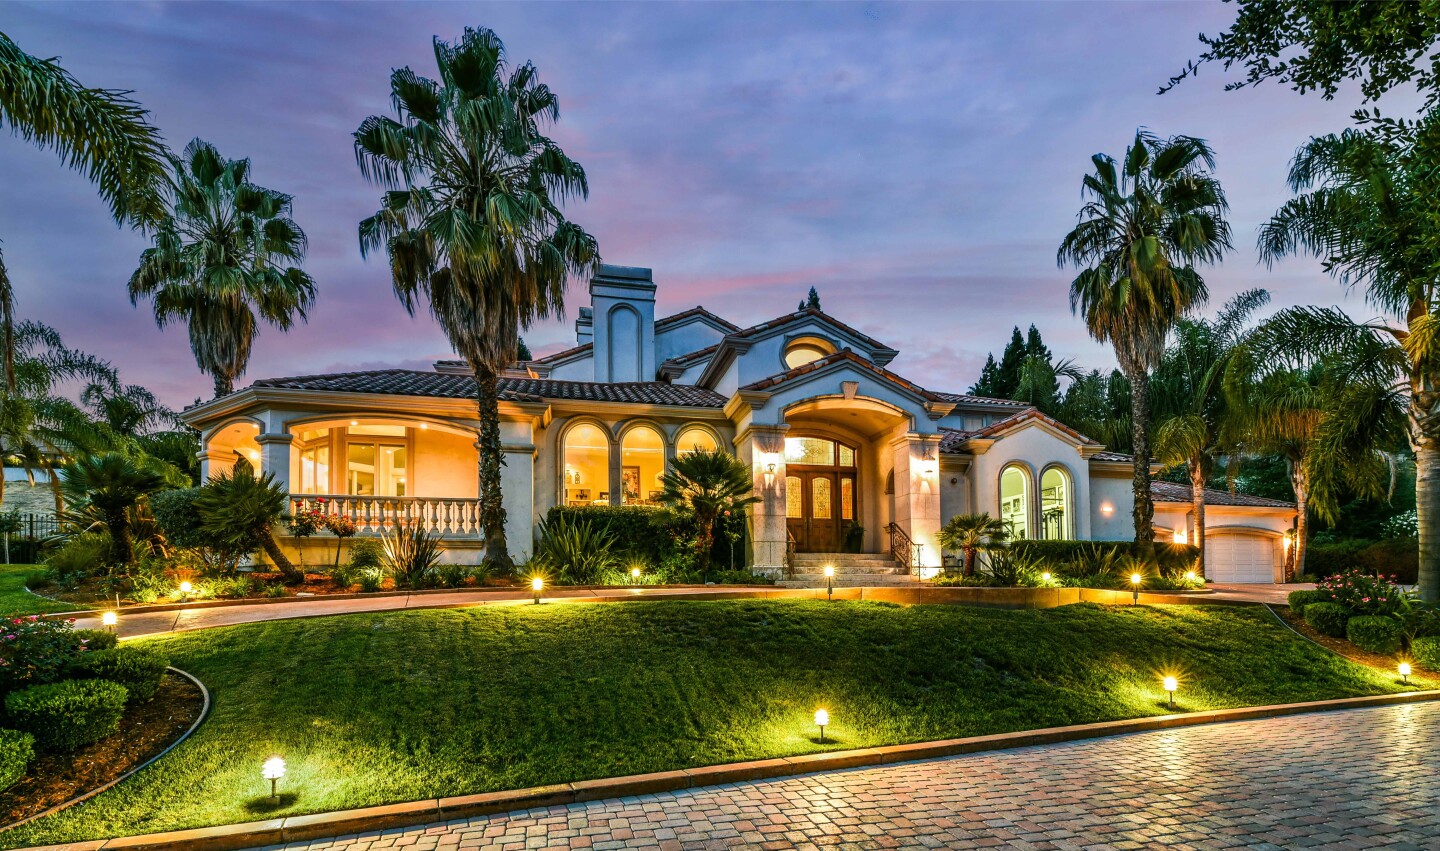 Built in 2002, the palatial home holds seven bedrooms, eight bathrooms, an indoor spa, sauna, movie theater and gym in more than 10,000 square feet.